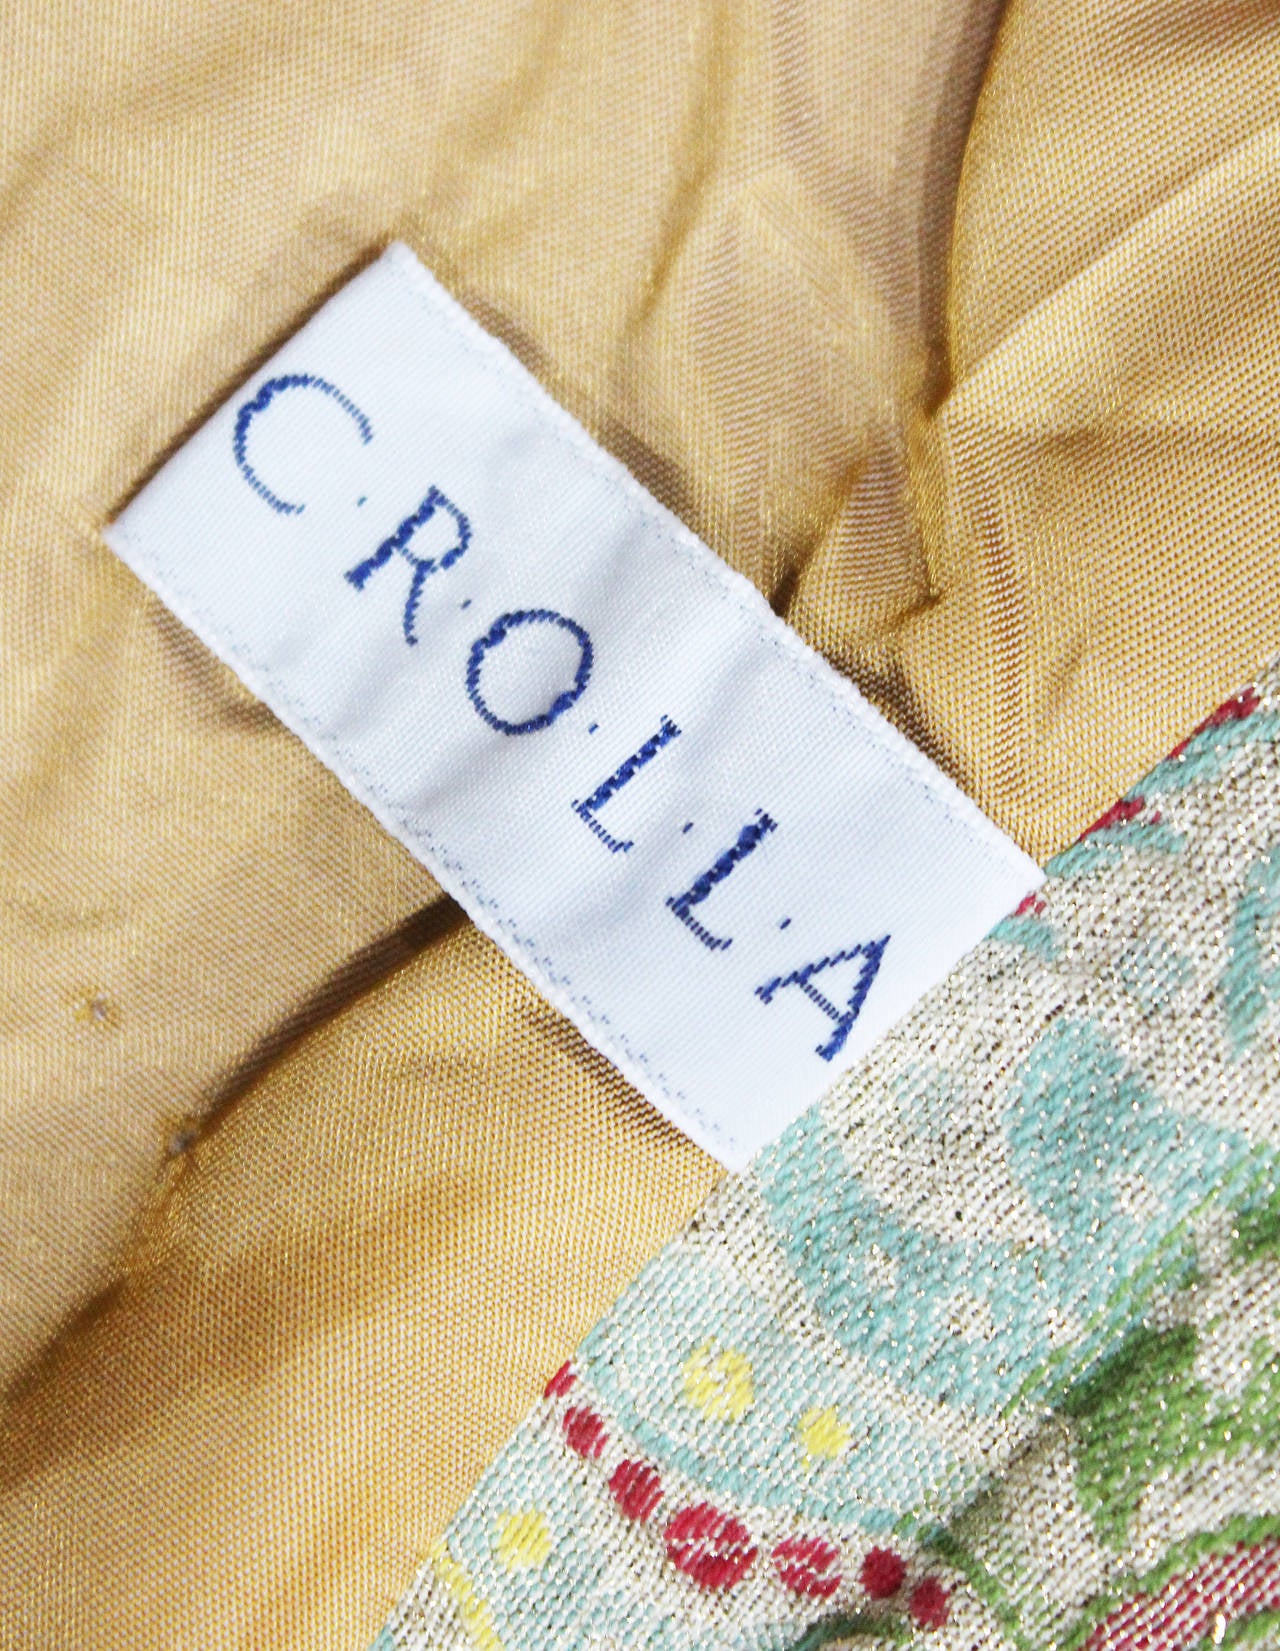 Beige Exceptional British Silk Brocade Paisley Tailored Coat by CROLLA c. 1984